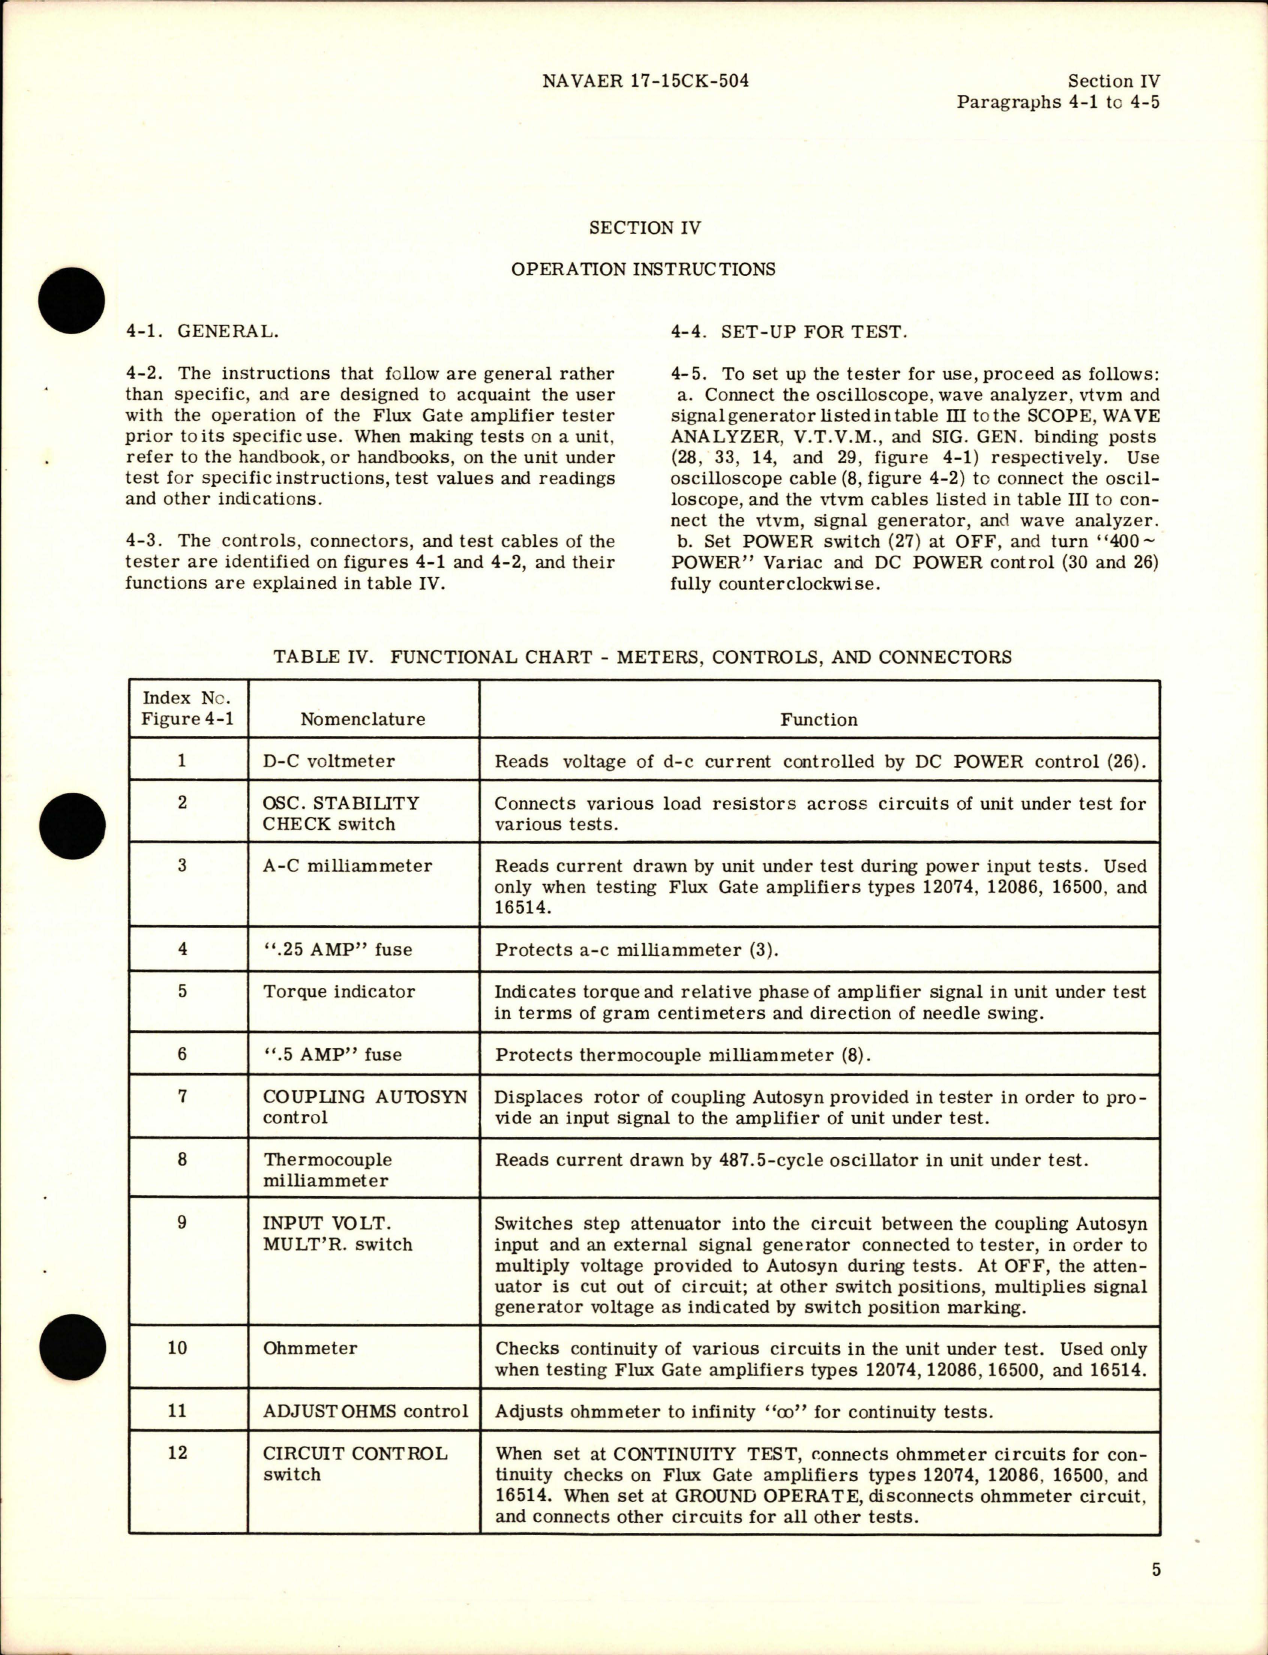 Sample page 9 from AirCorps Library document: Operation and Service Instructions with Illustrated Parts for Flux Gate Amplifier Tester - Type 13659-1-A